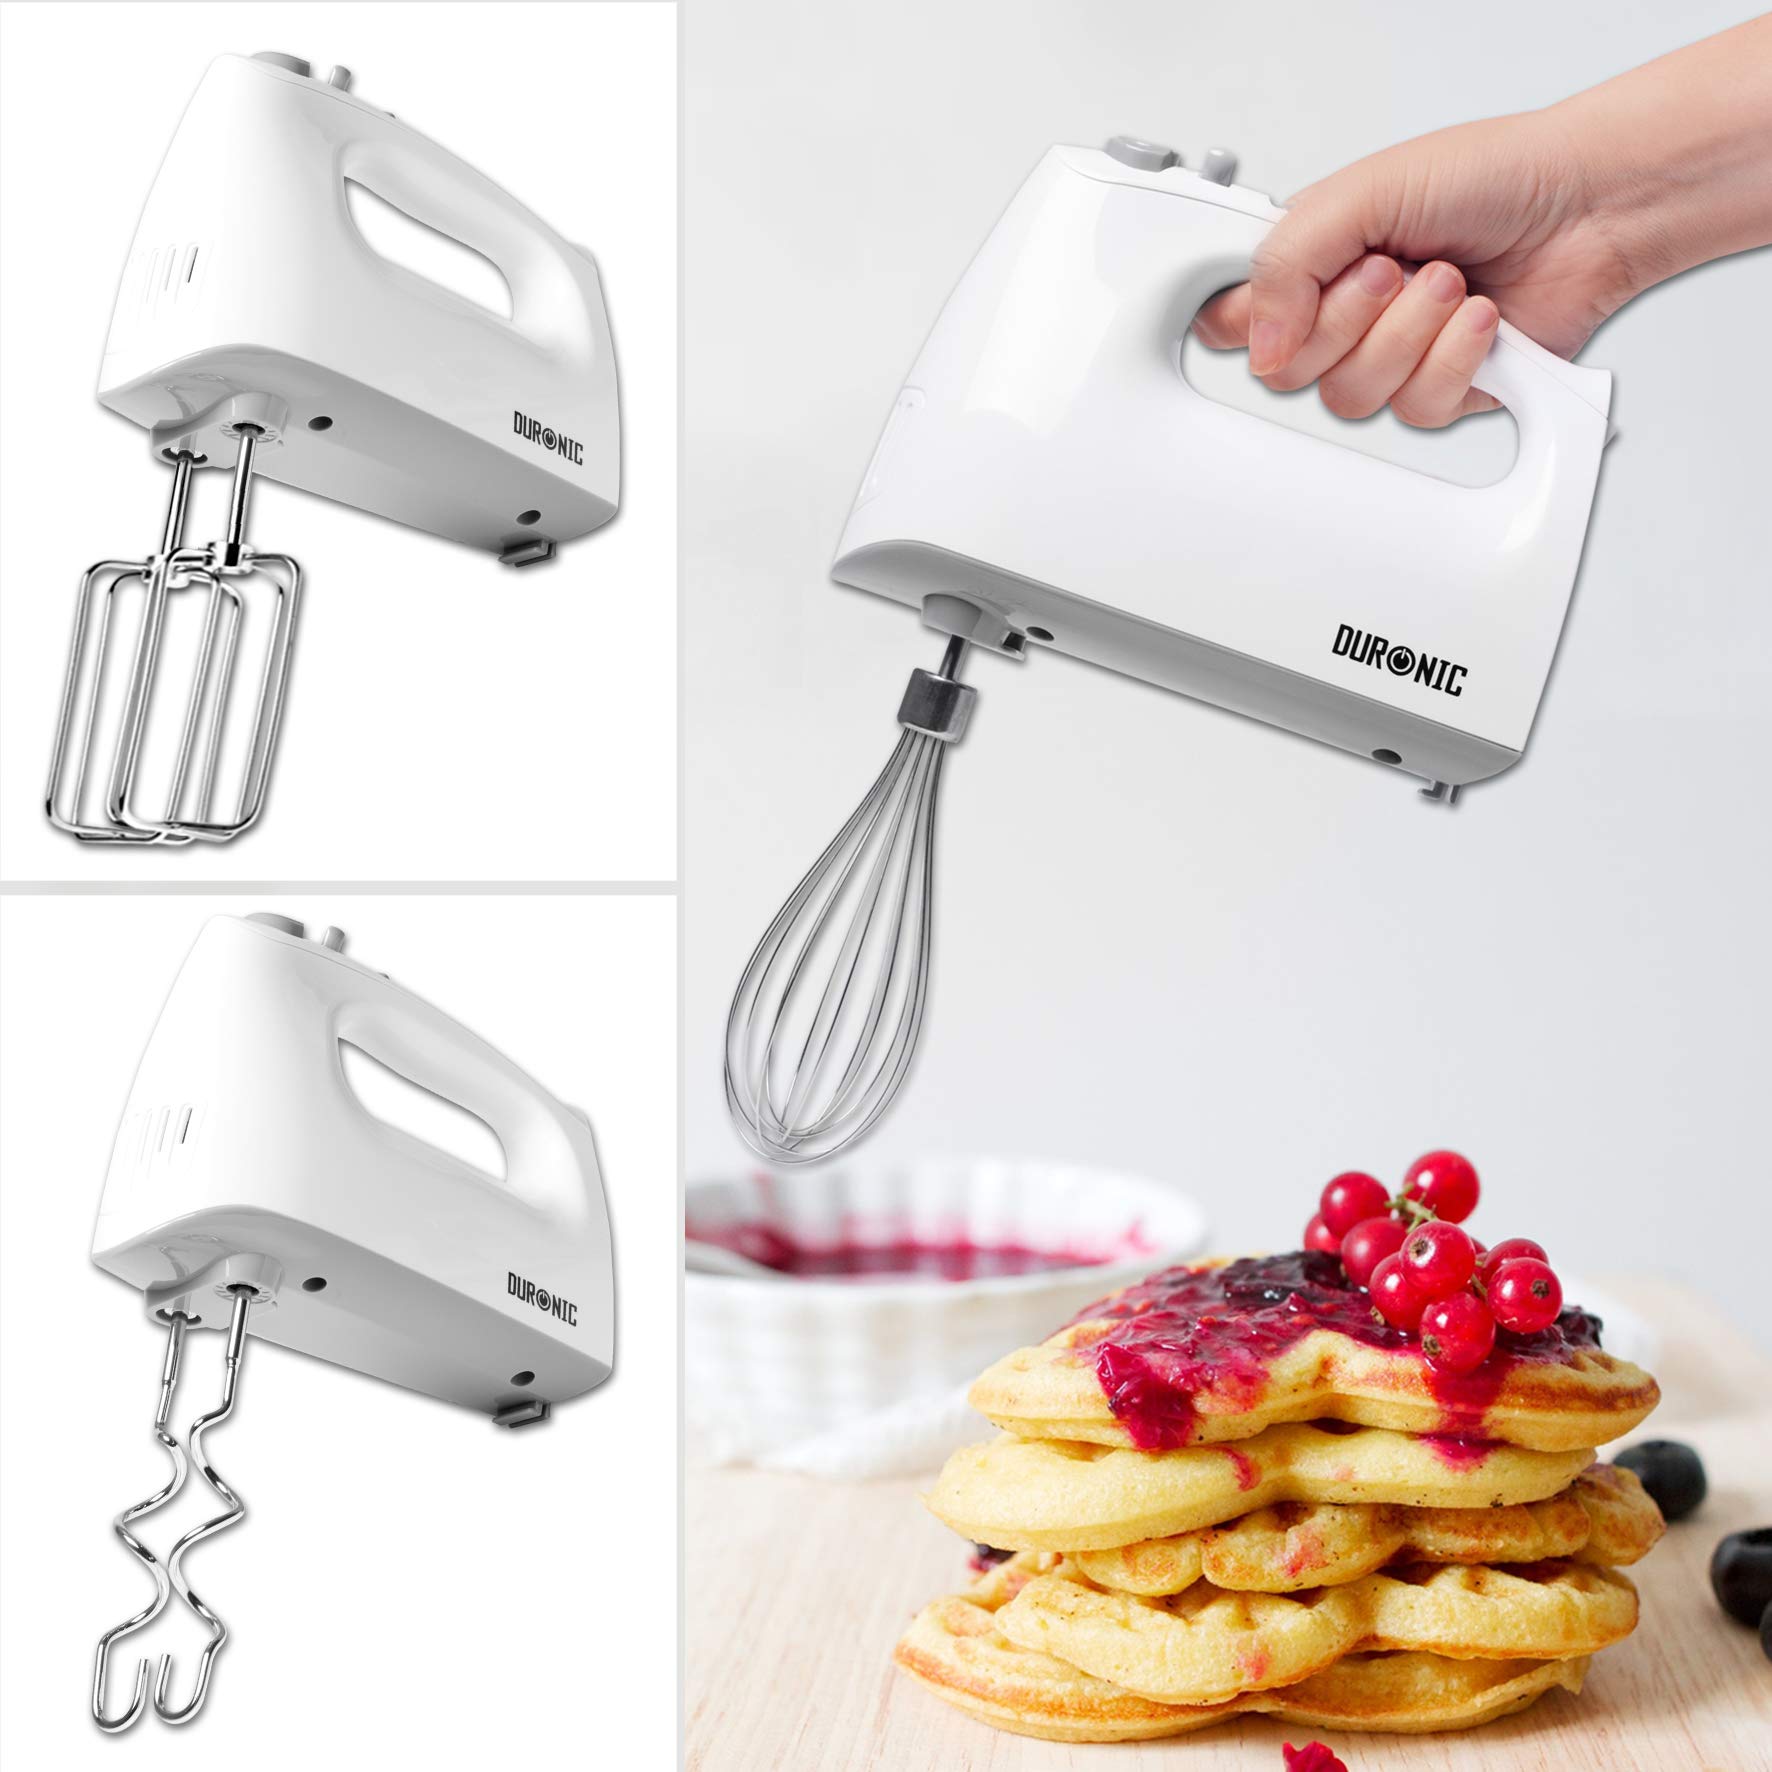 Duronic HM4W Electric Hand Mixer | 400W | 5 Speed | WHITE Baking Set with 5 Attachments: 2 Beaters, 2 Dough Hooks, 1 Whisk | All-in-One with Built-In Storage Case | Five Mix Settings & Turbo Speed